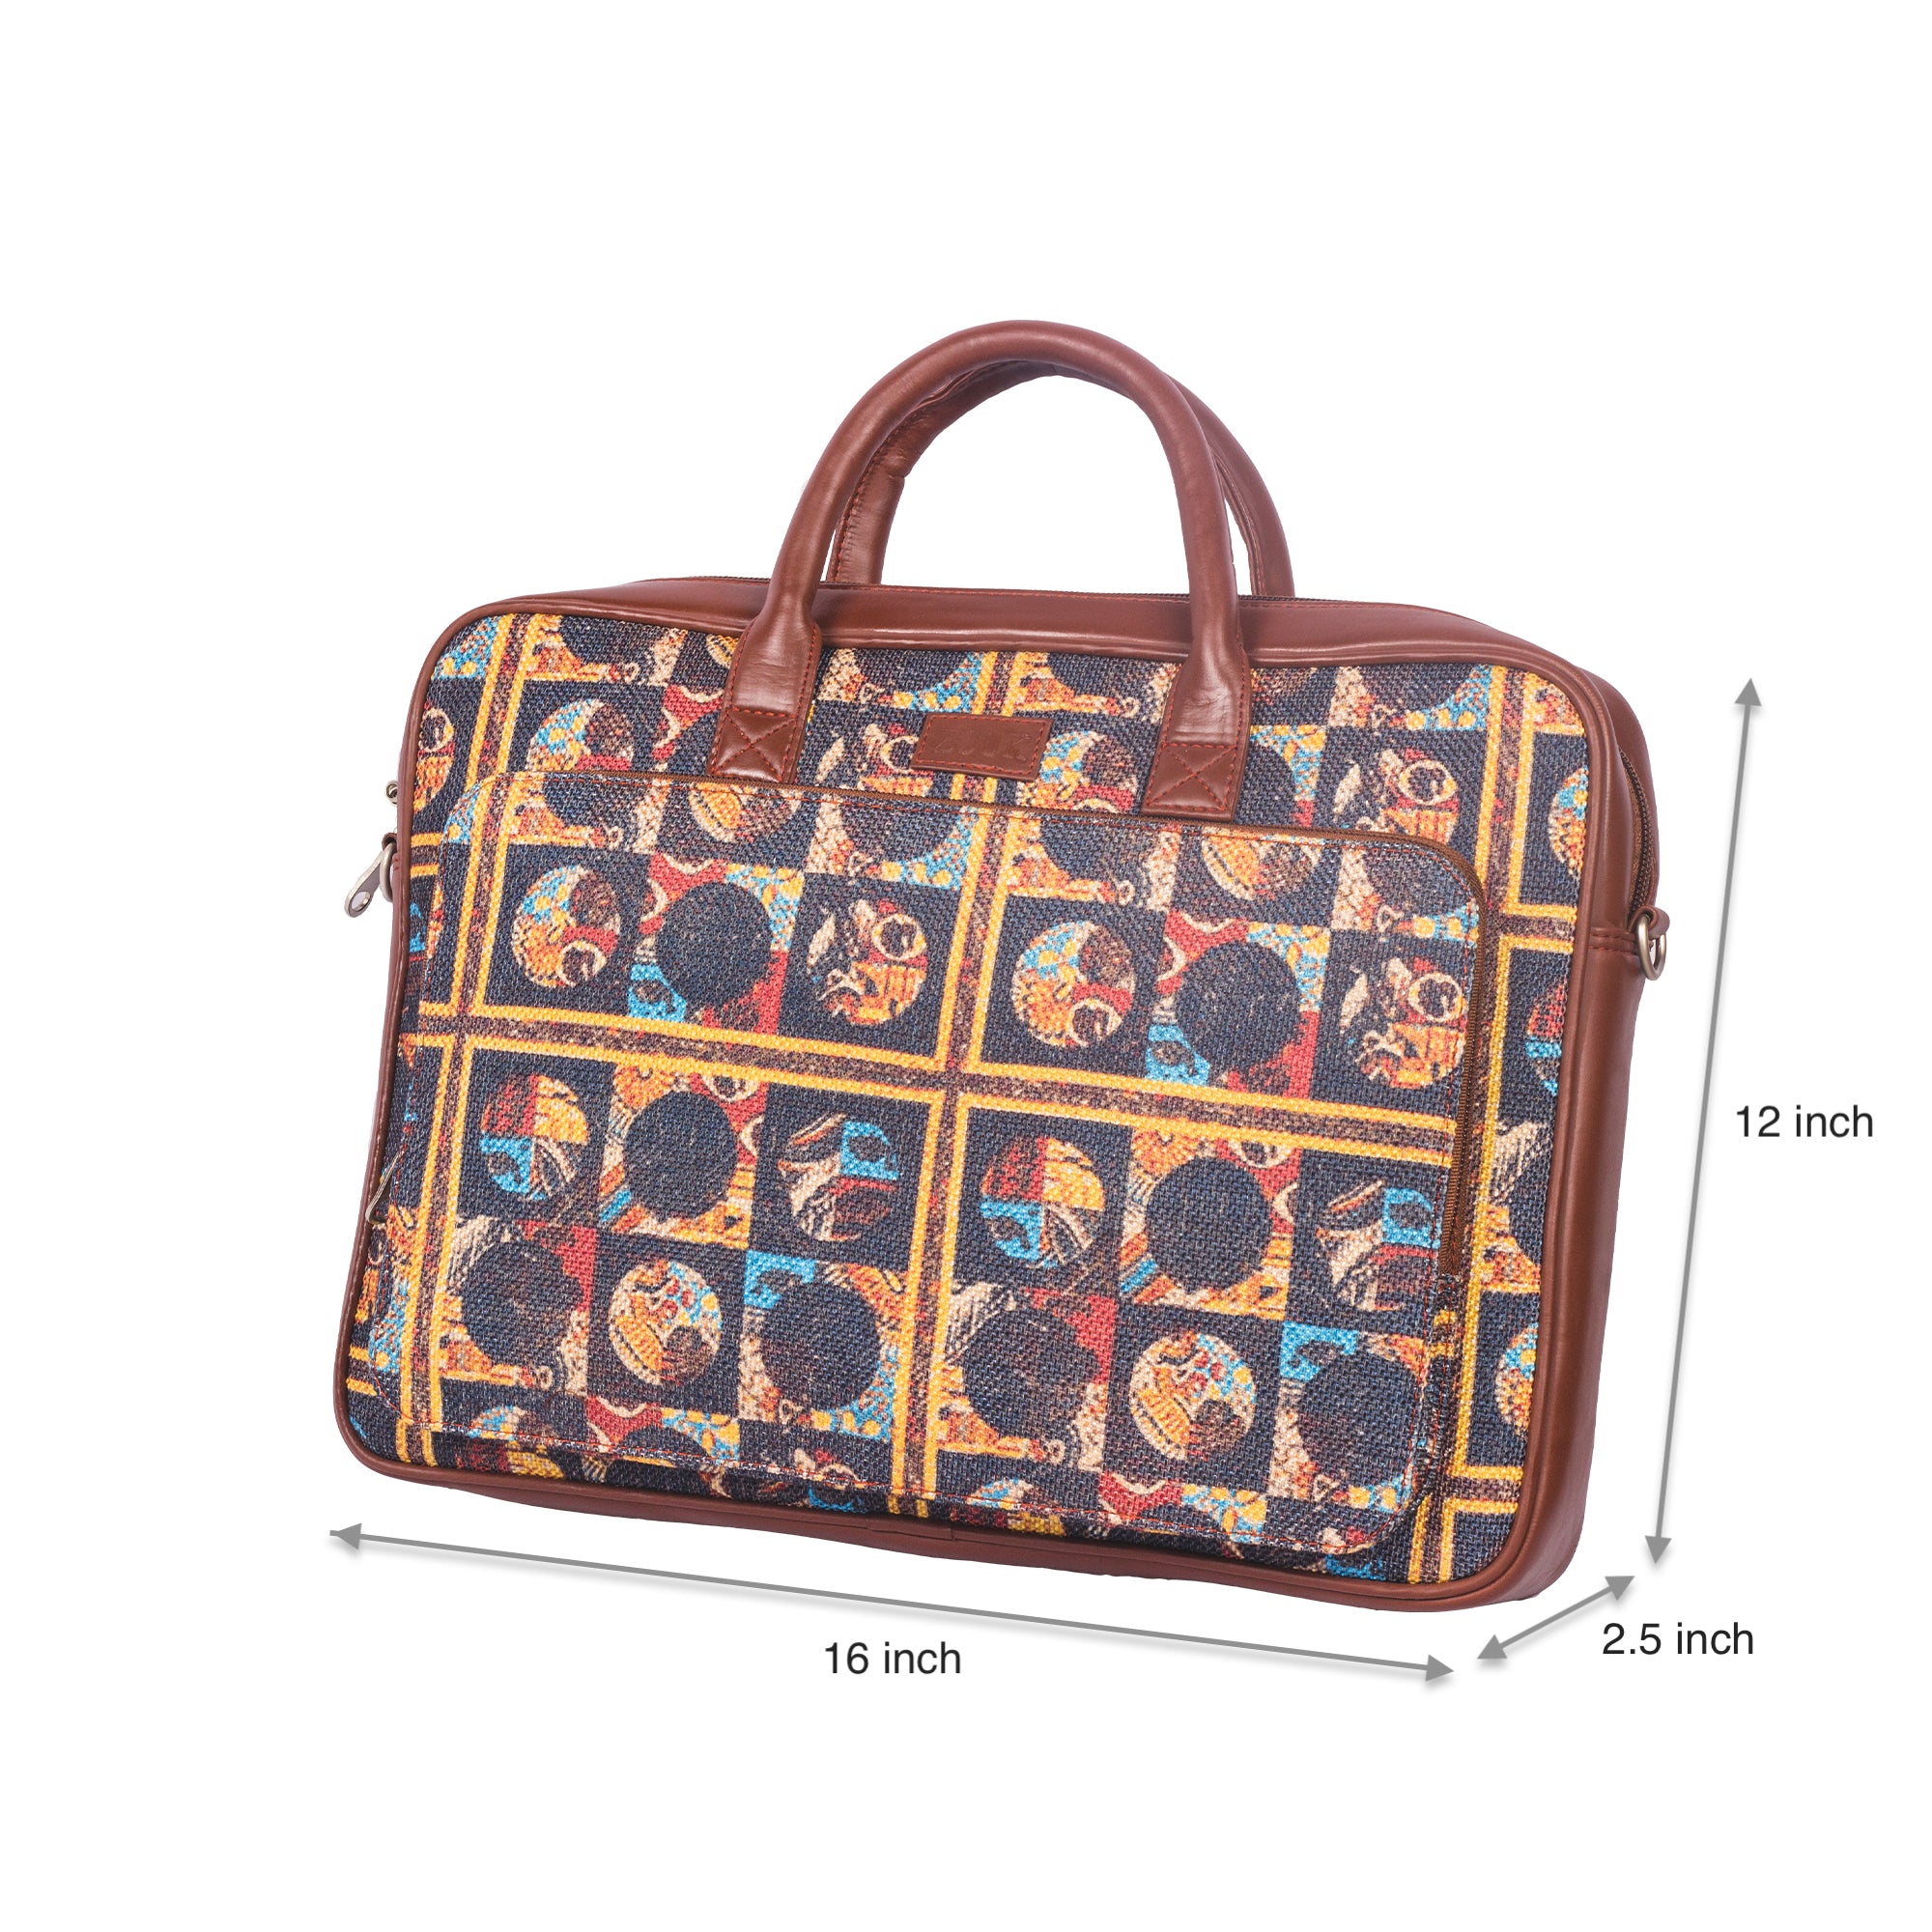 African Art Laptop Bag with dimensions